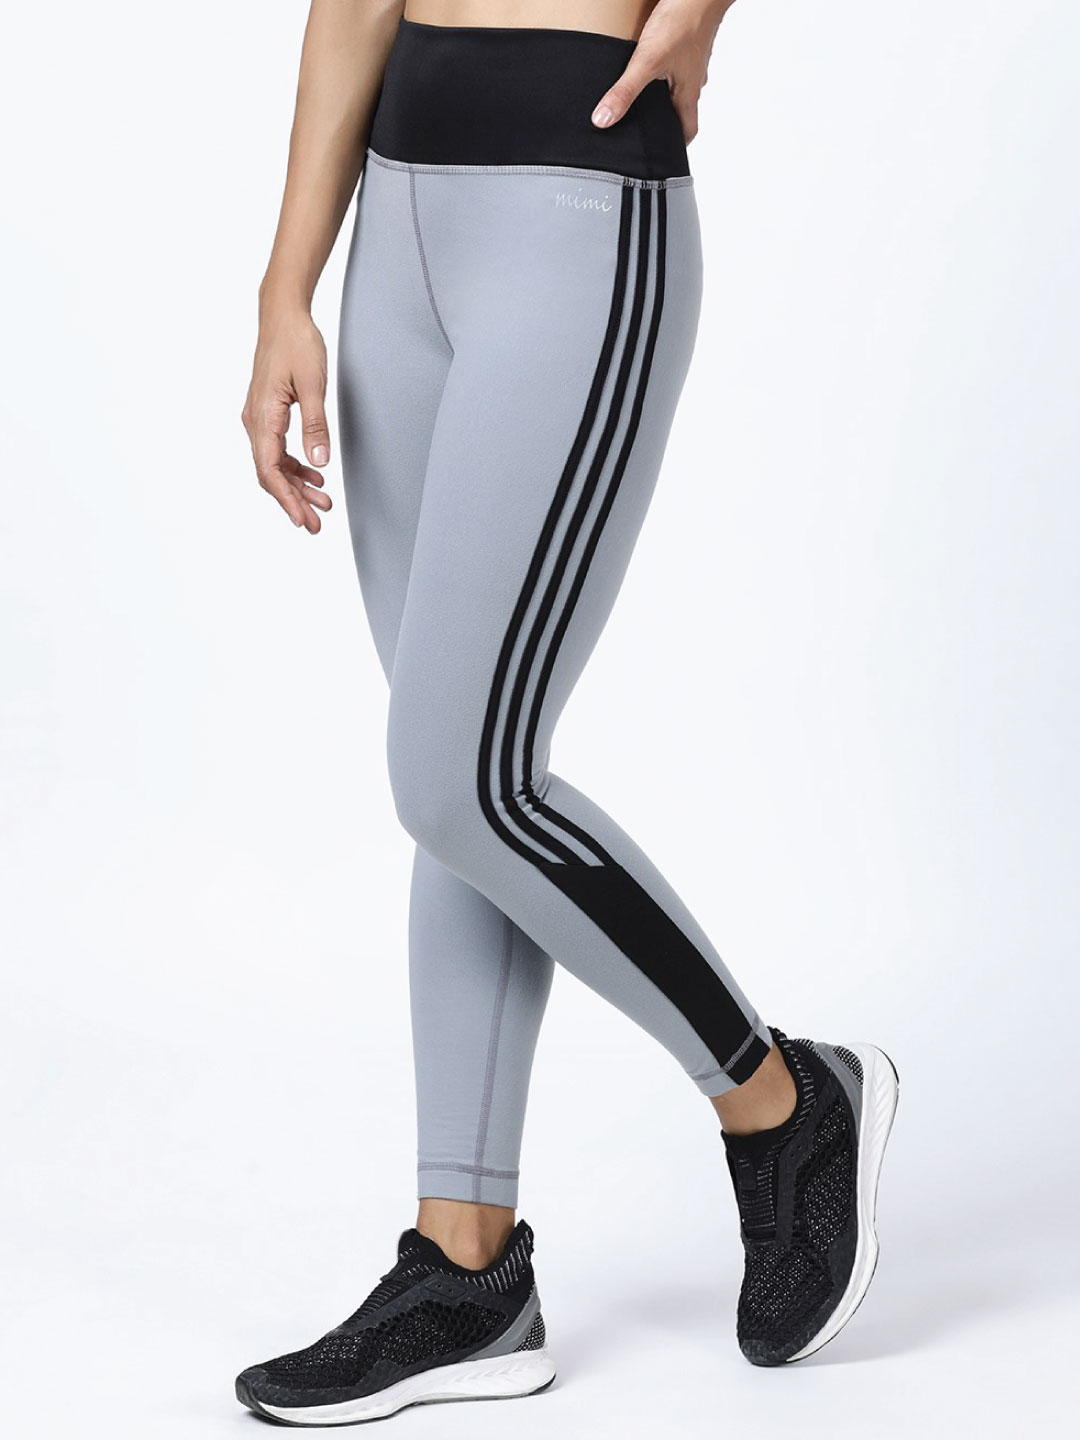 Vertical Striped Leggings for Women - Elongate Forever in Cement and Black